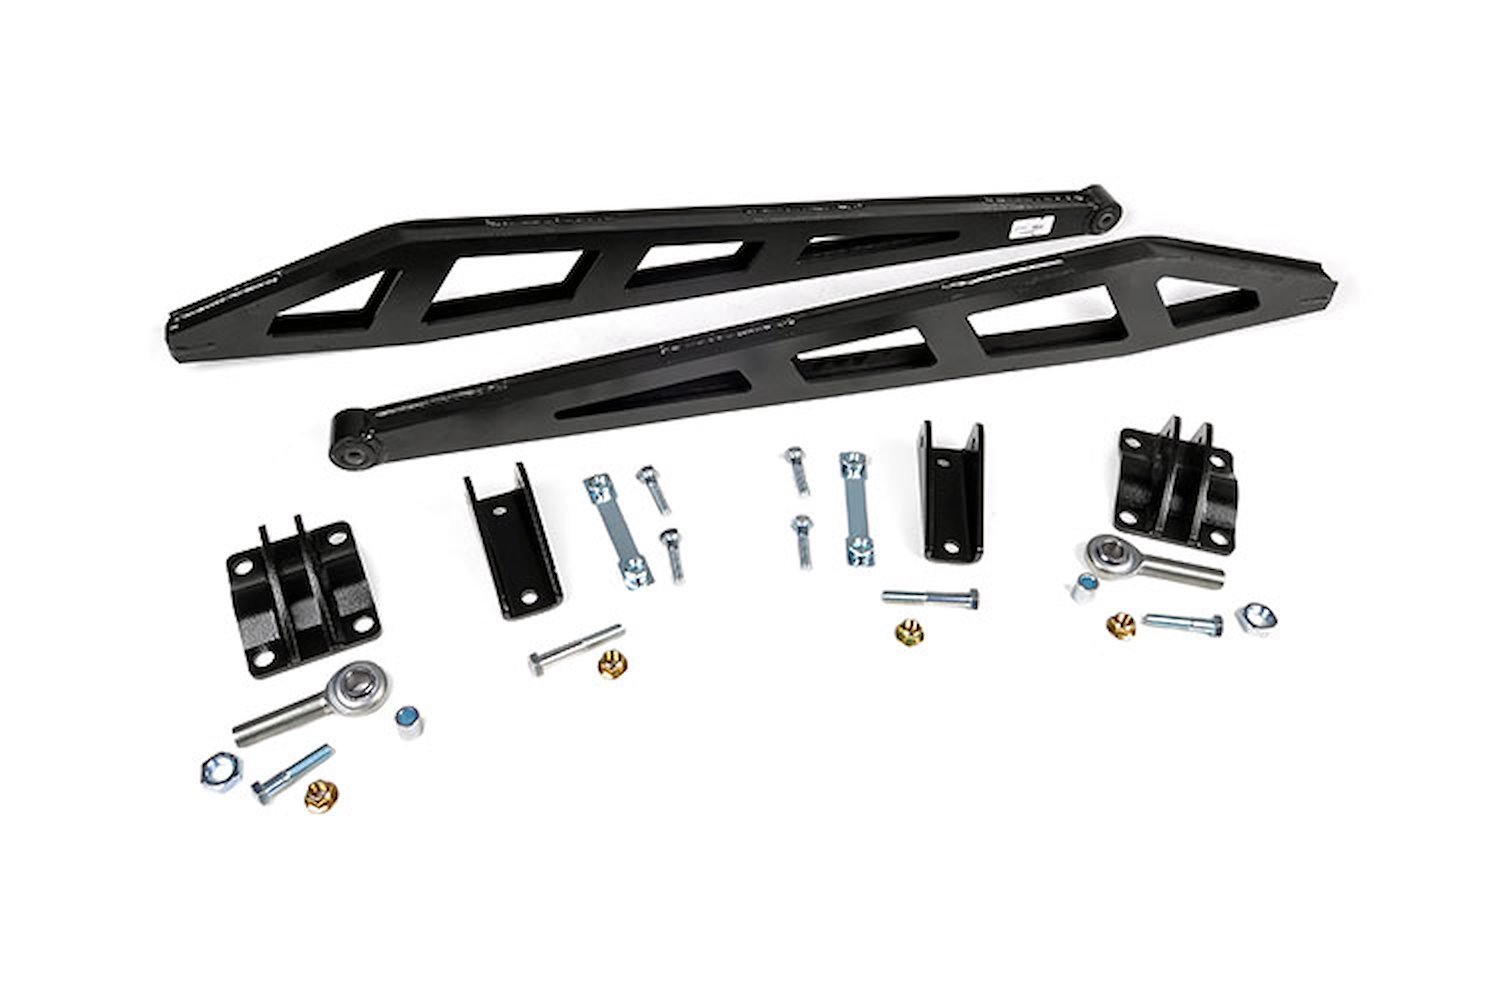 1069 Traction Bar Kit for 0-7.5-inch Lifts